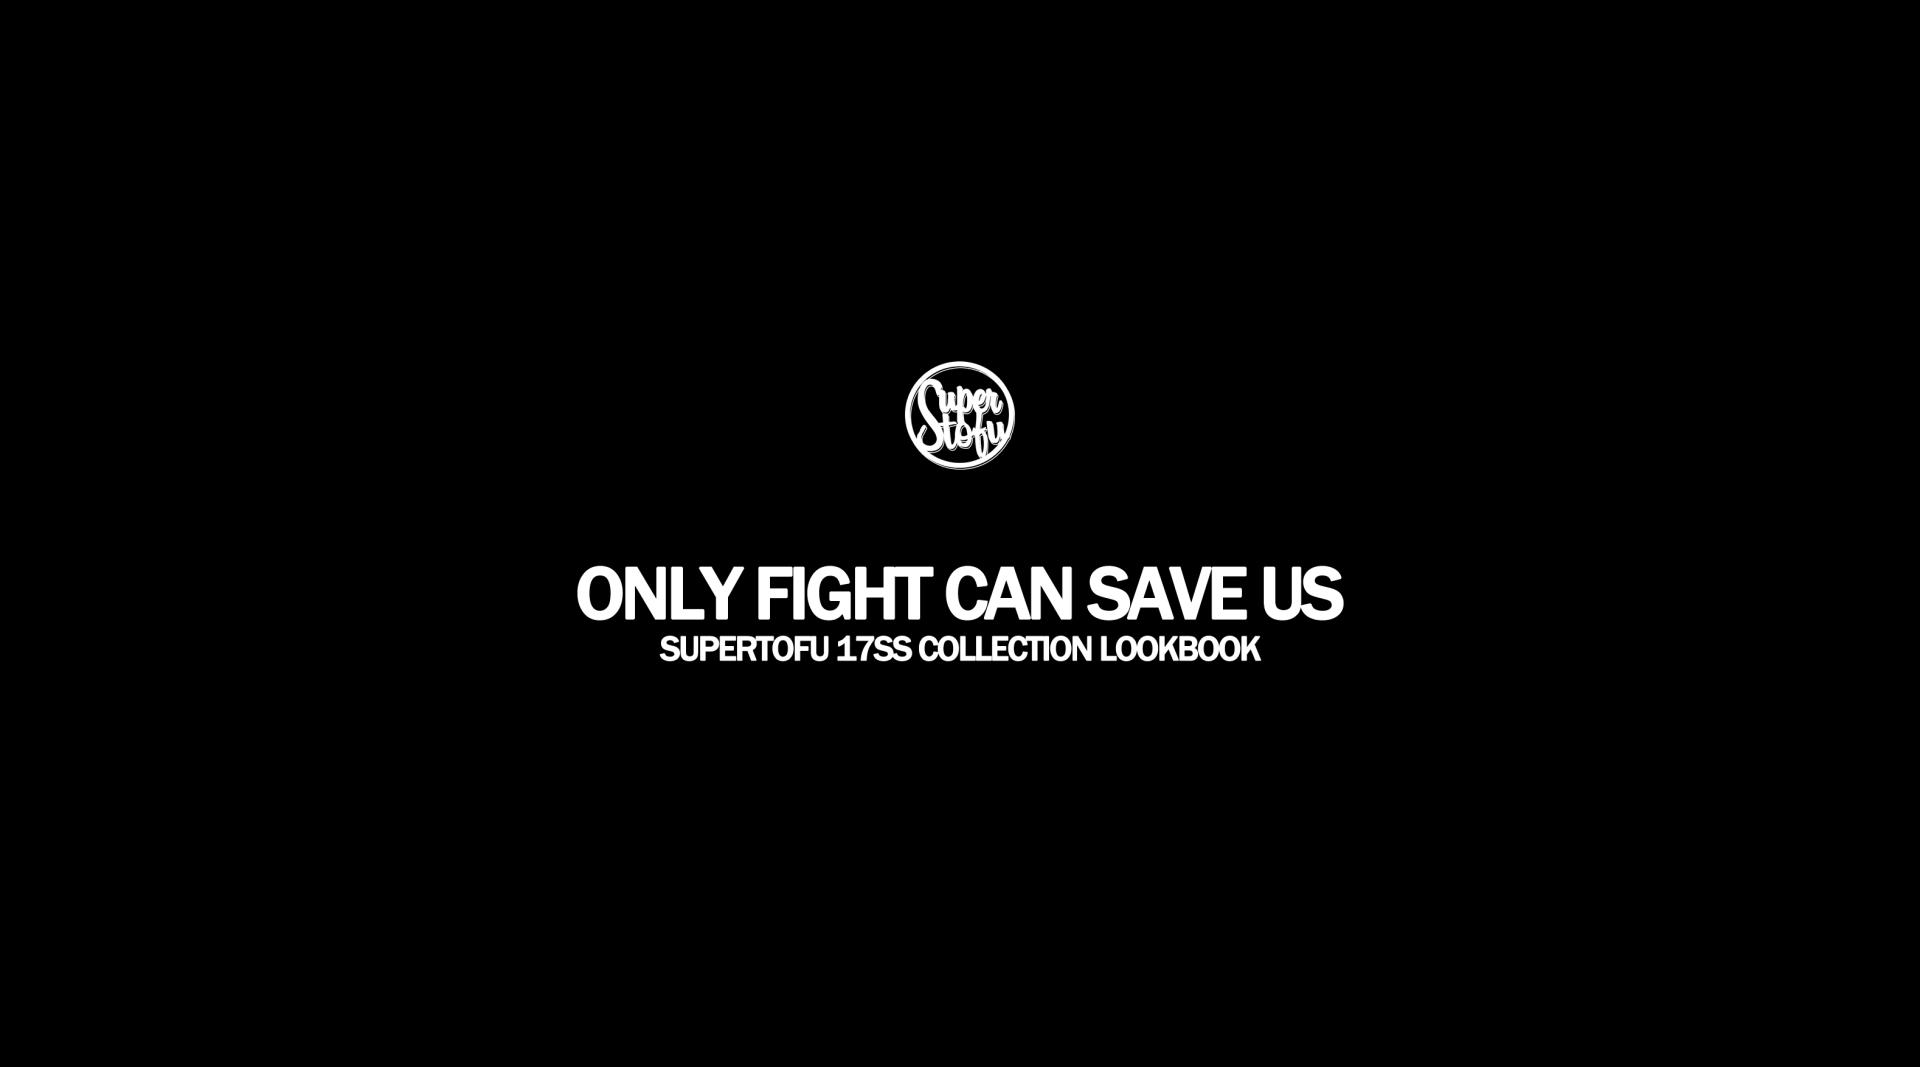 SUPERTOFU BRAND 17SS LOOKBOOK「ONLY FIGHT CAN SAVE US」